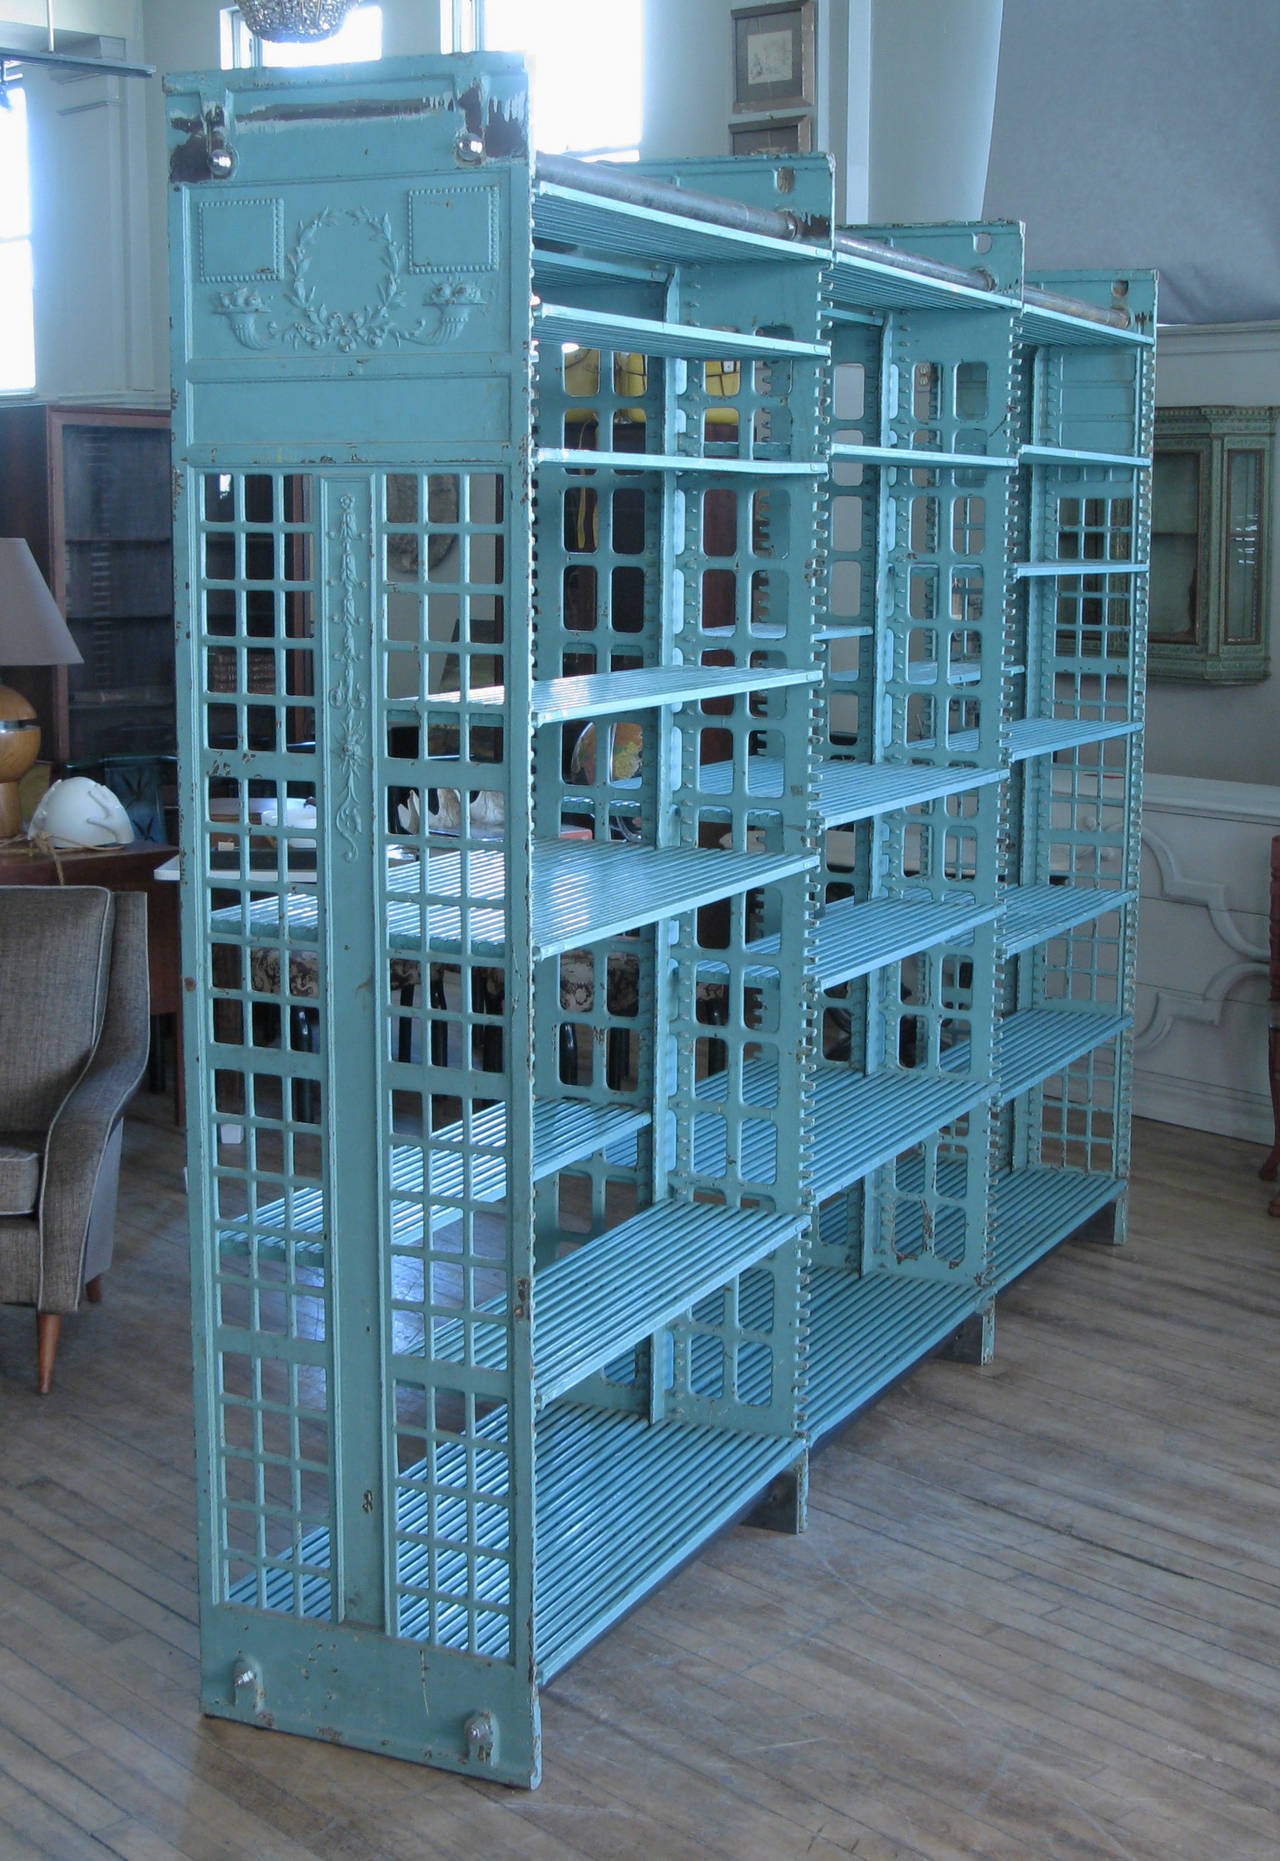 A rare set of antique cast iron archival library bookcases by Snead & Co. These impressive cast iron bookcases with adjustable steel shelves were the standard in the late 19th and early 20th century for library and archival storage, and were used by